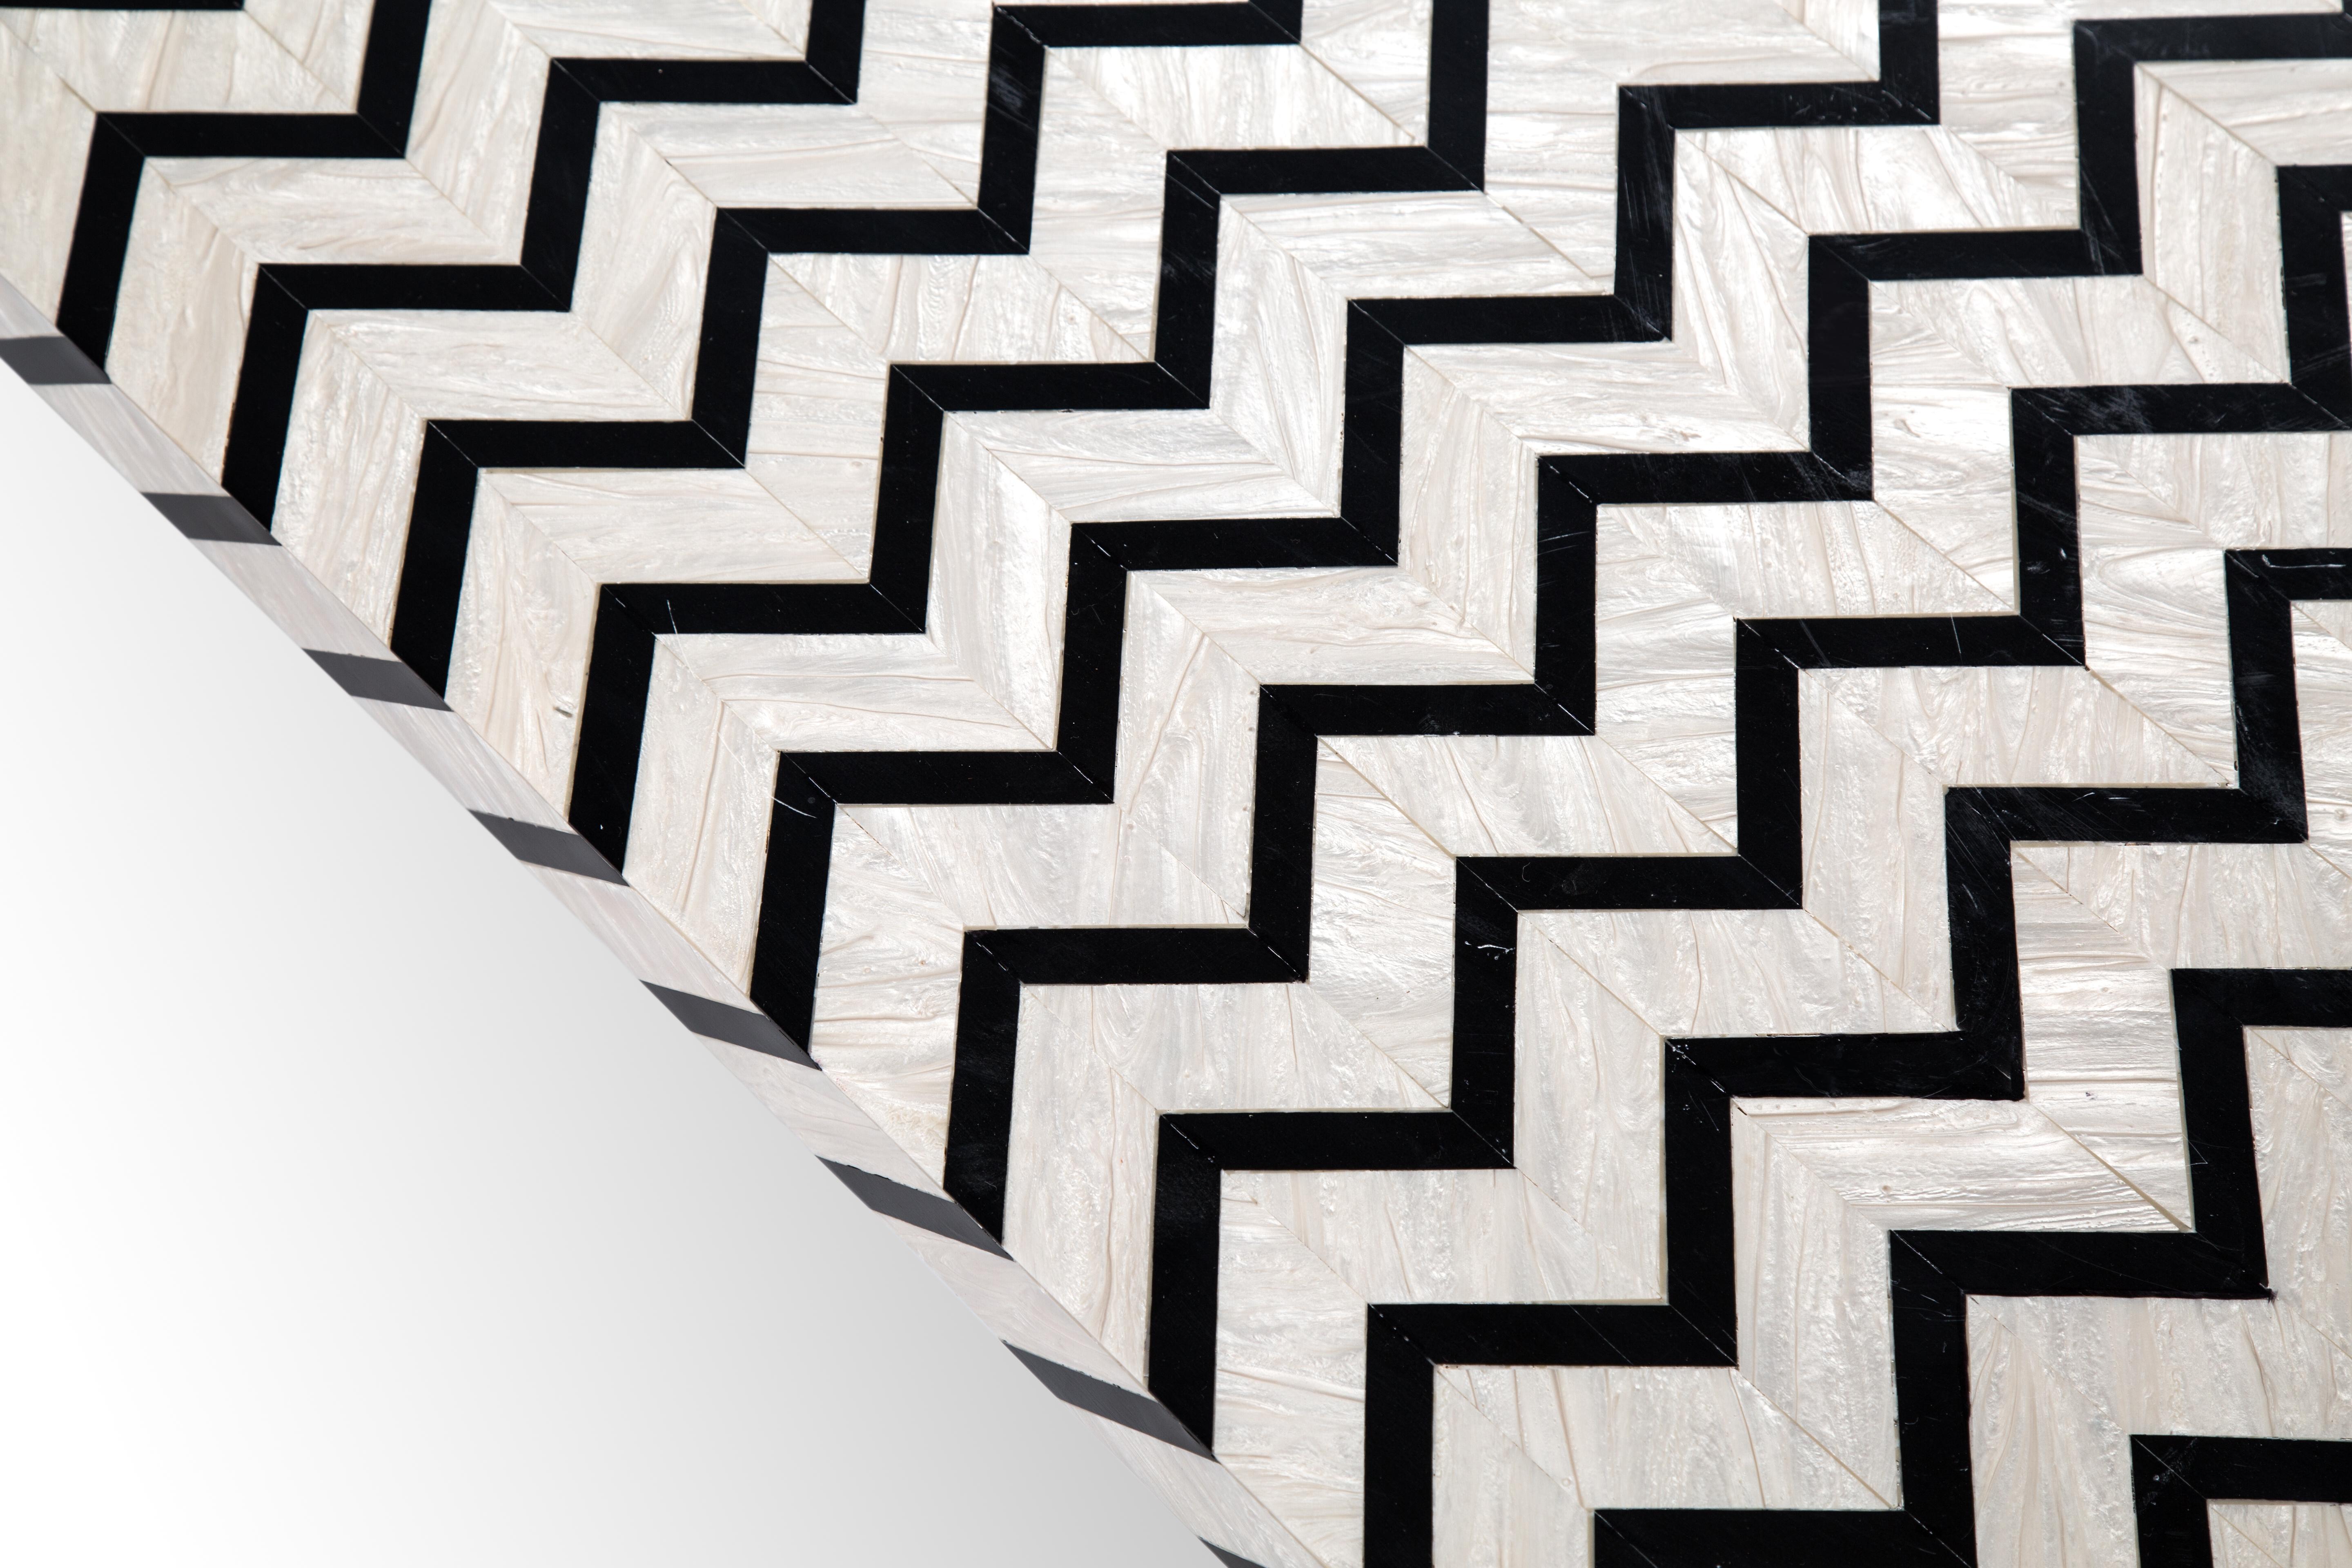 Hand Crafted Acrylic Coffee Table with Nile Pattern Inspired from Ancient Egypt.
Our Nile table adds boldness to your room with its black & white chevron pattern, which embodies the Nile’s flowing water. It is made of pearly white and black acrylic